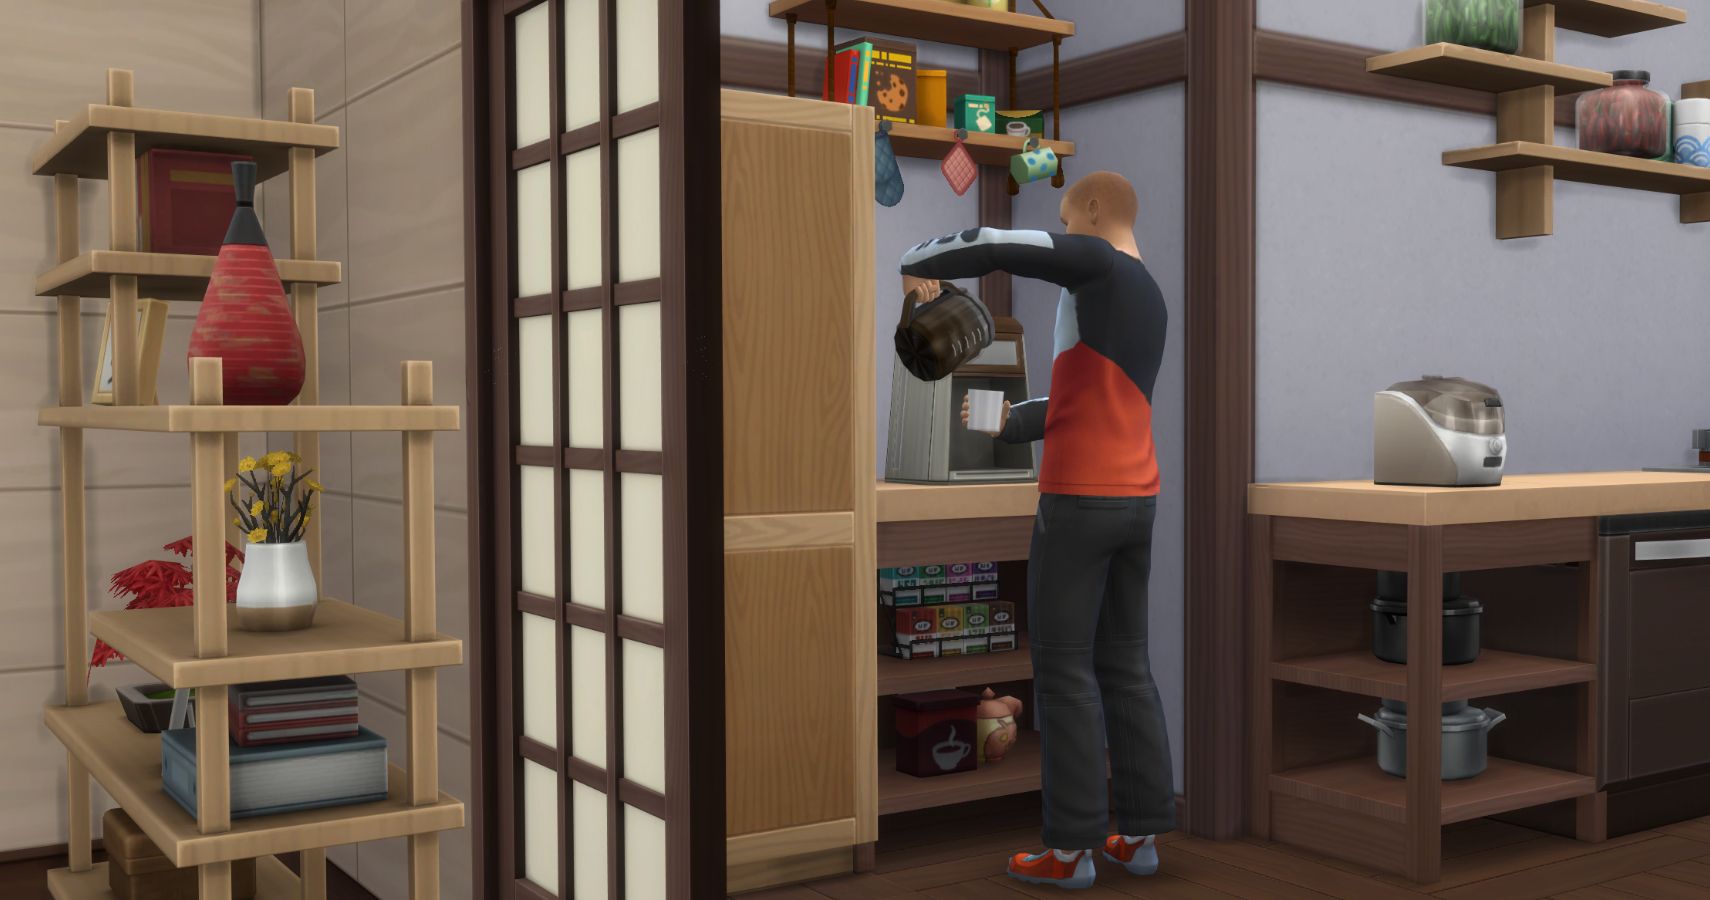 A sim making coffee in a home kitchen.